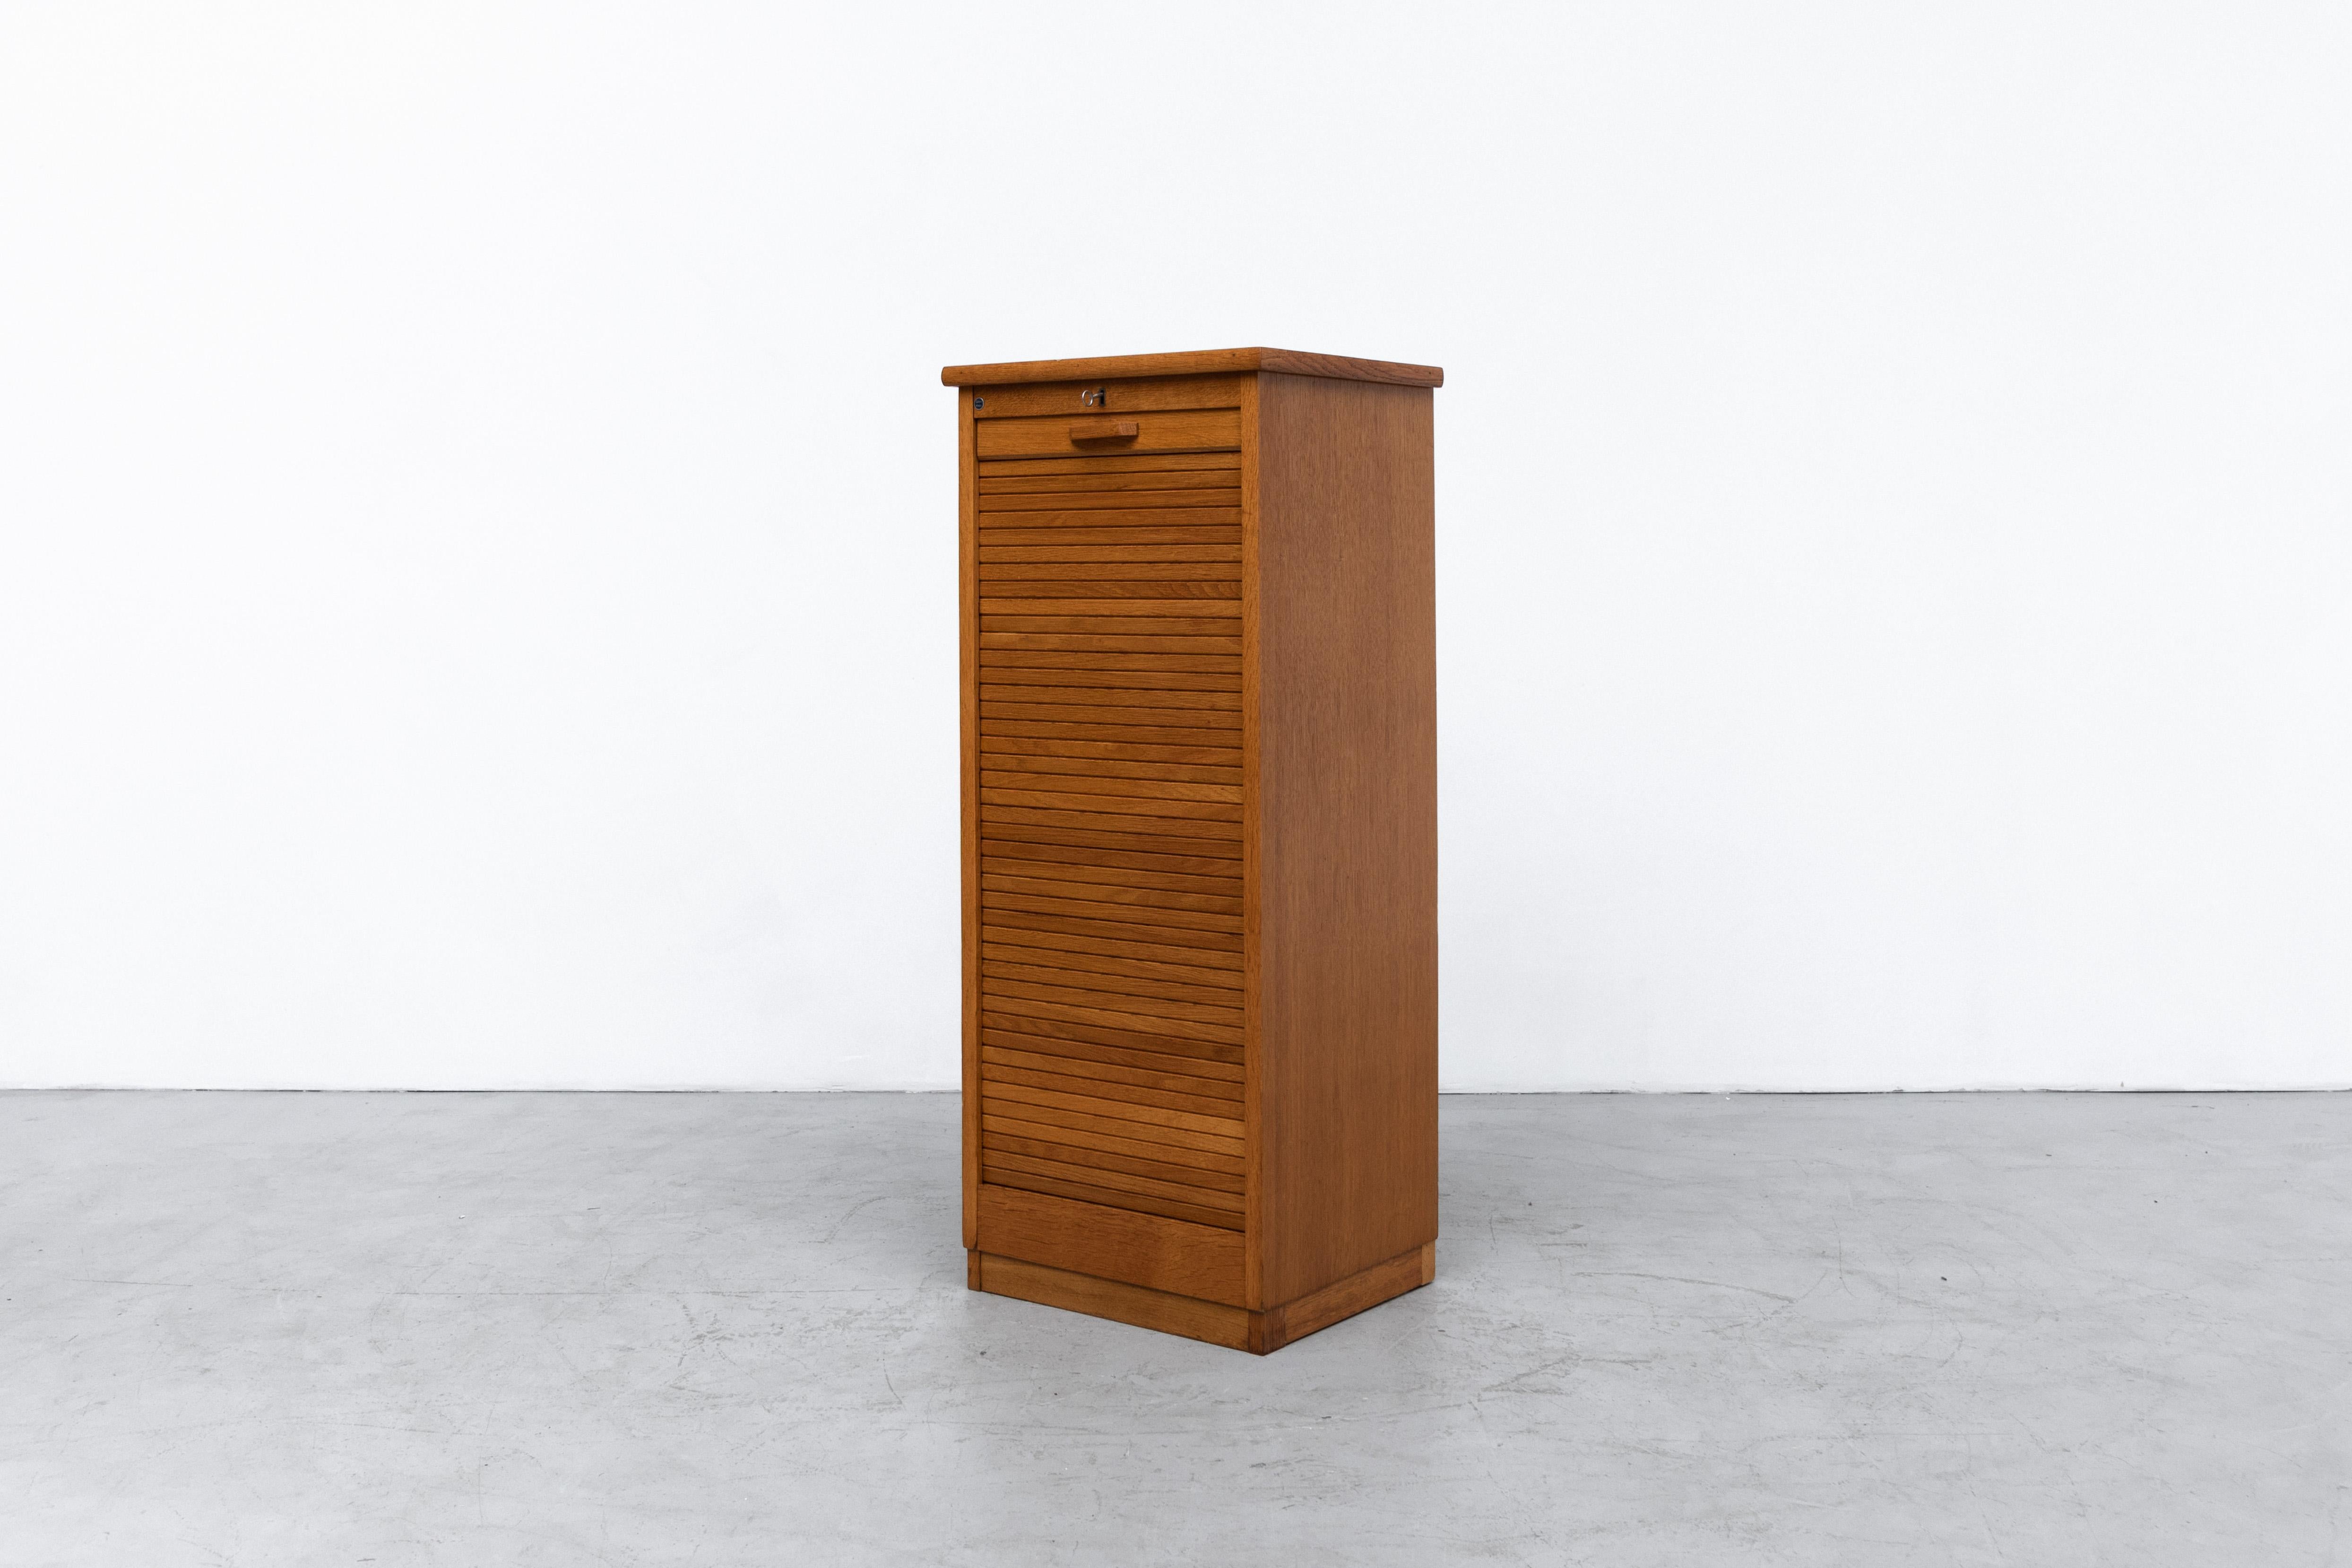 Tall Eeka file cabinet with stacked birch drawers and magazine storage rack behind locking tambour door. In original condition with key, visible wear and some (non active) wormwood holes. Similar Eeka cabinets also available listed separately.